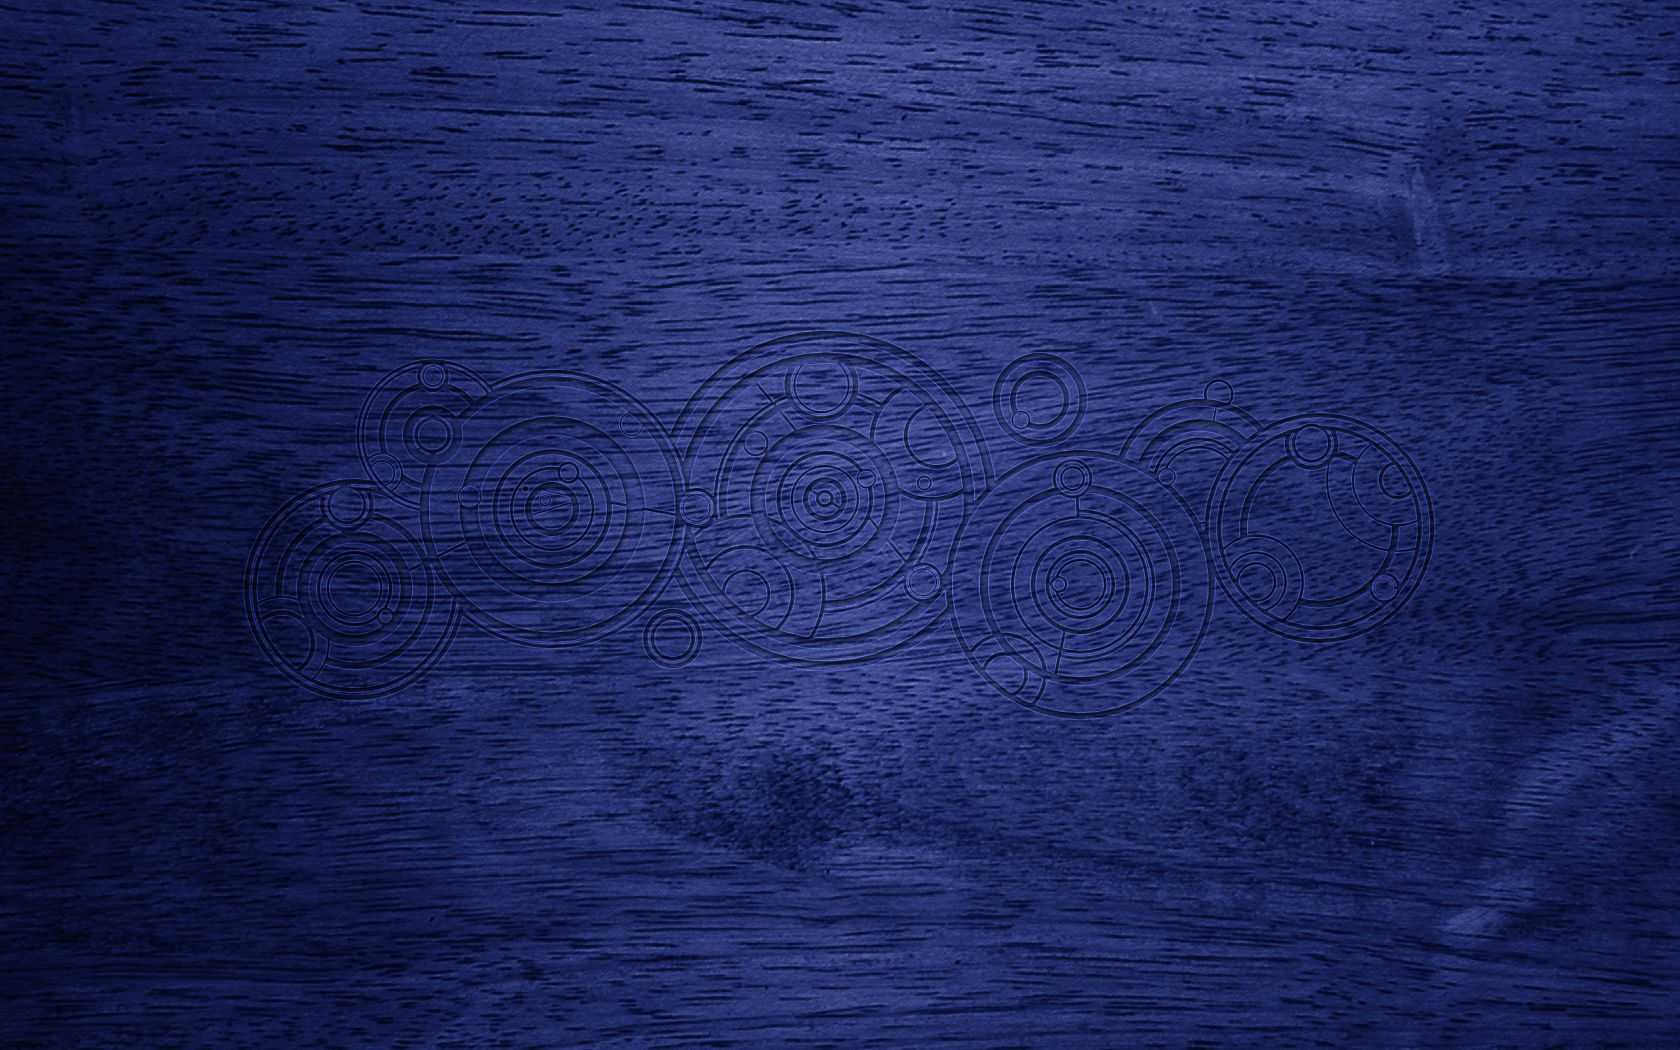 By Lesprit S Request Here Is A Tardis Blue More Wood Like Wallpaper